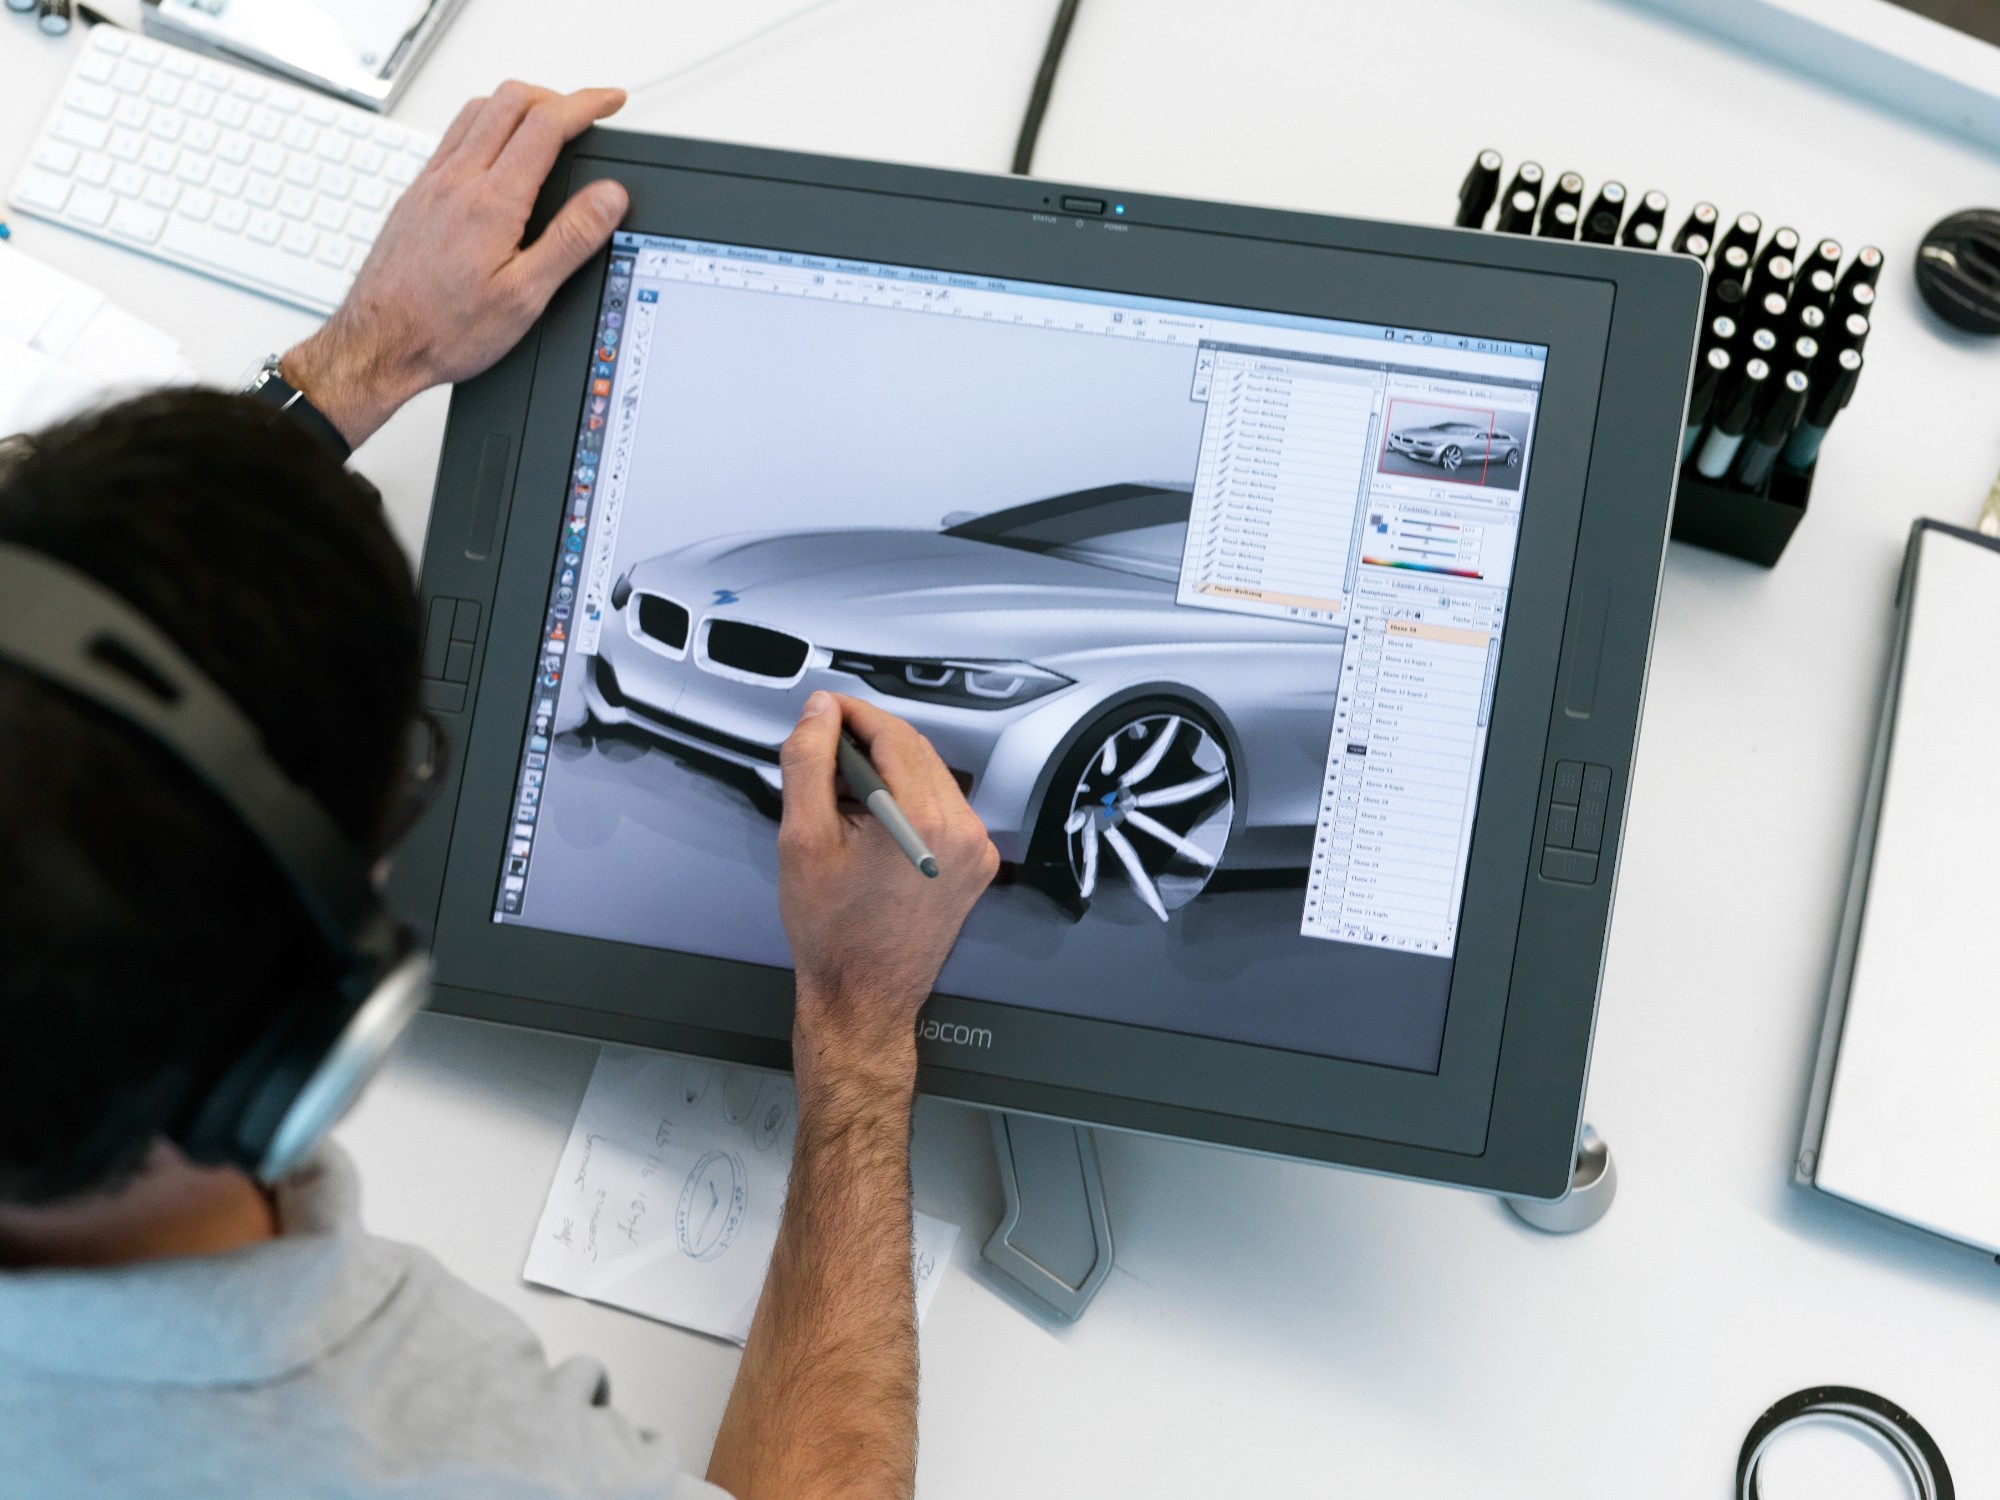 So you want to be a car designer? Our industry insider peels back the studio curtain